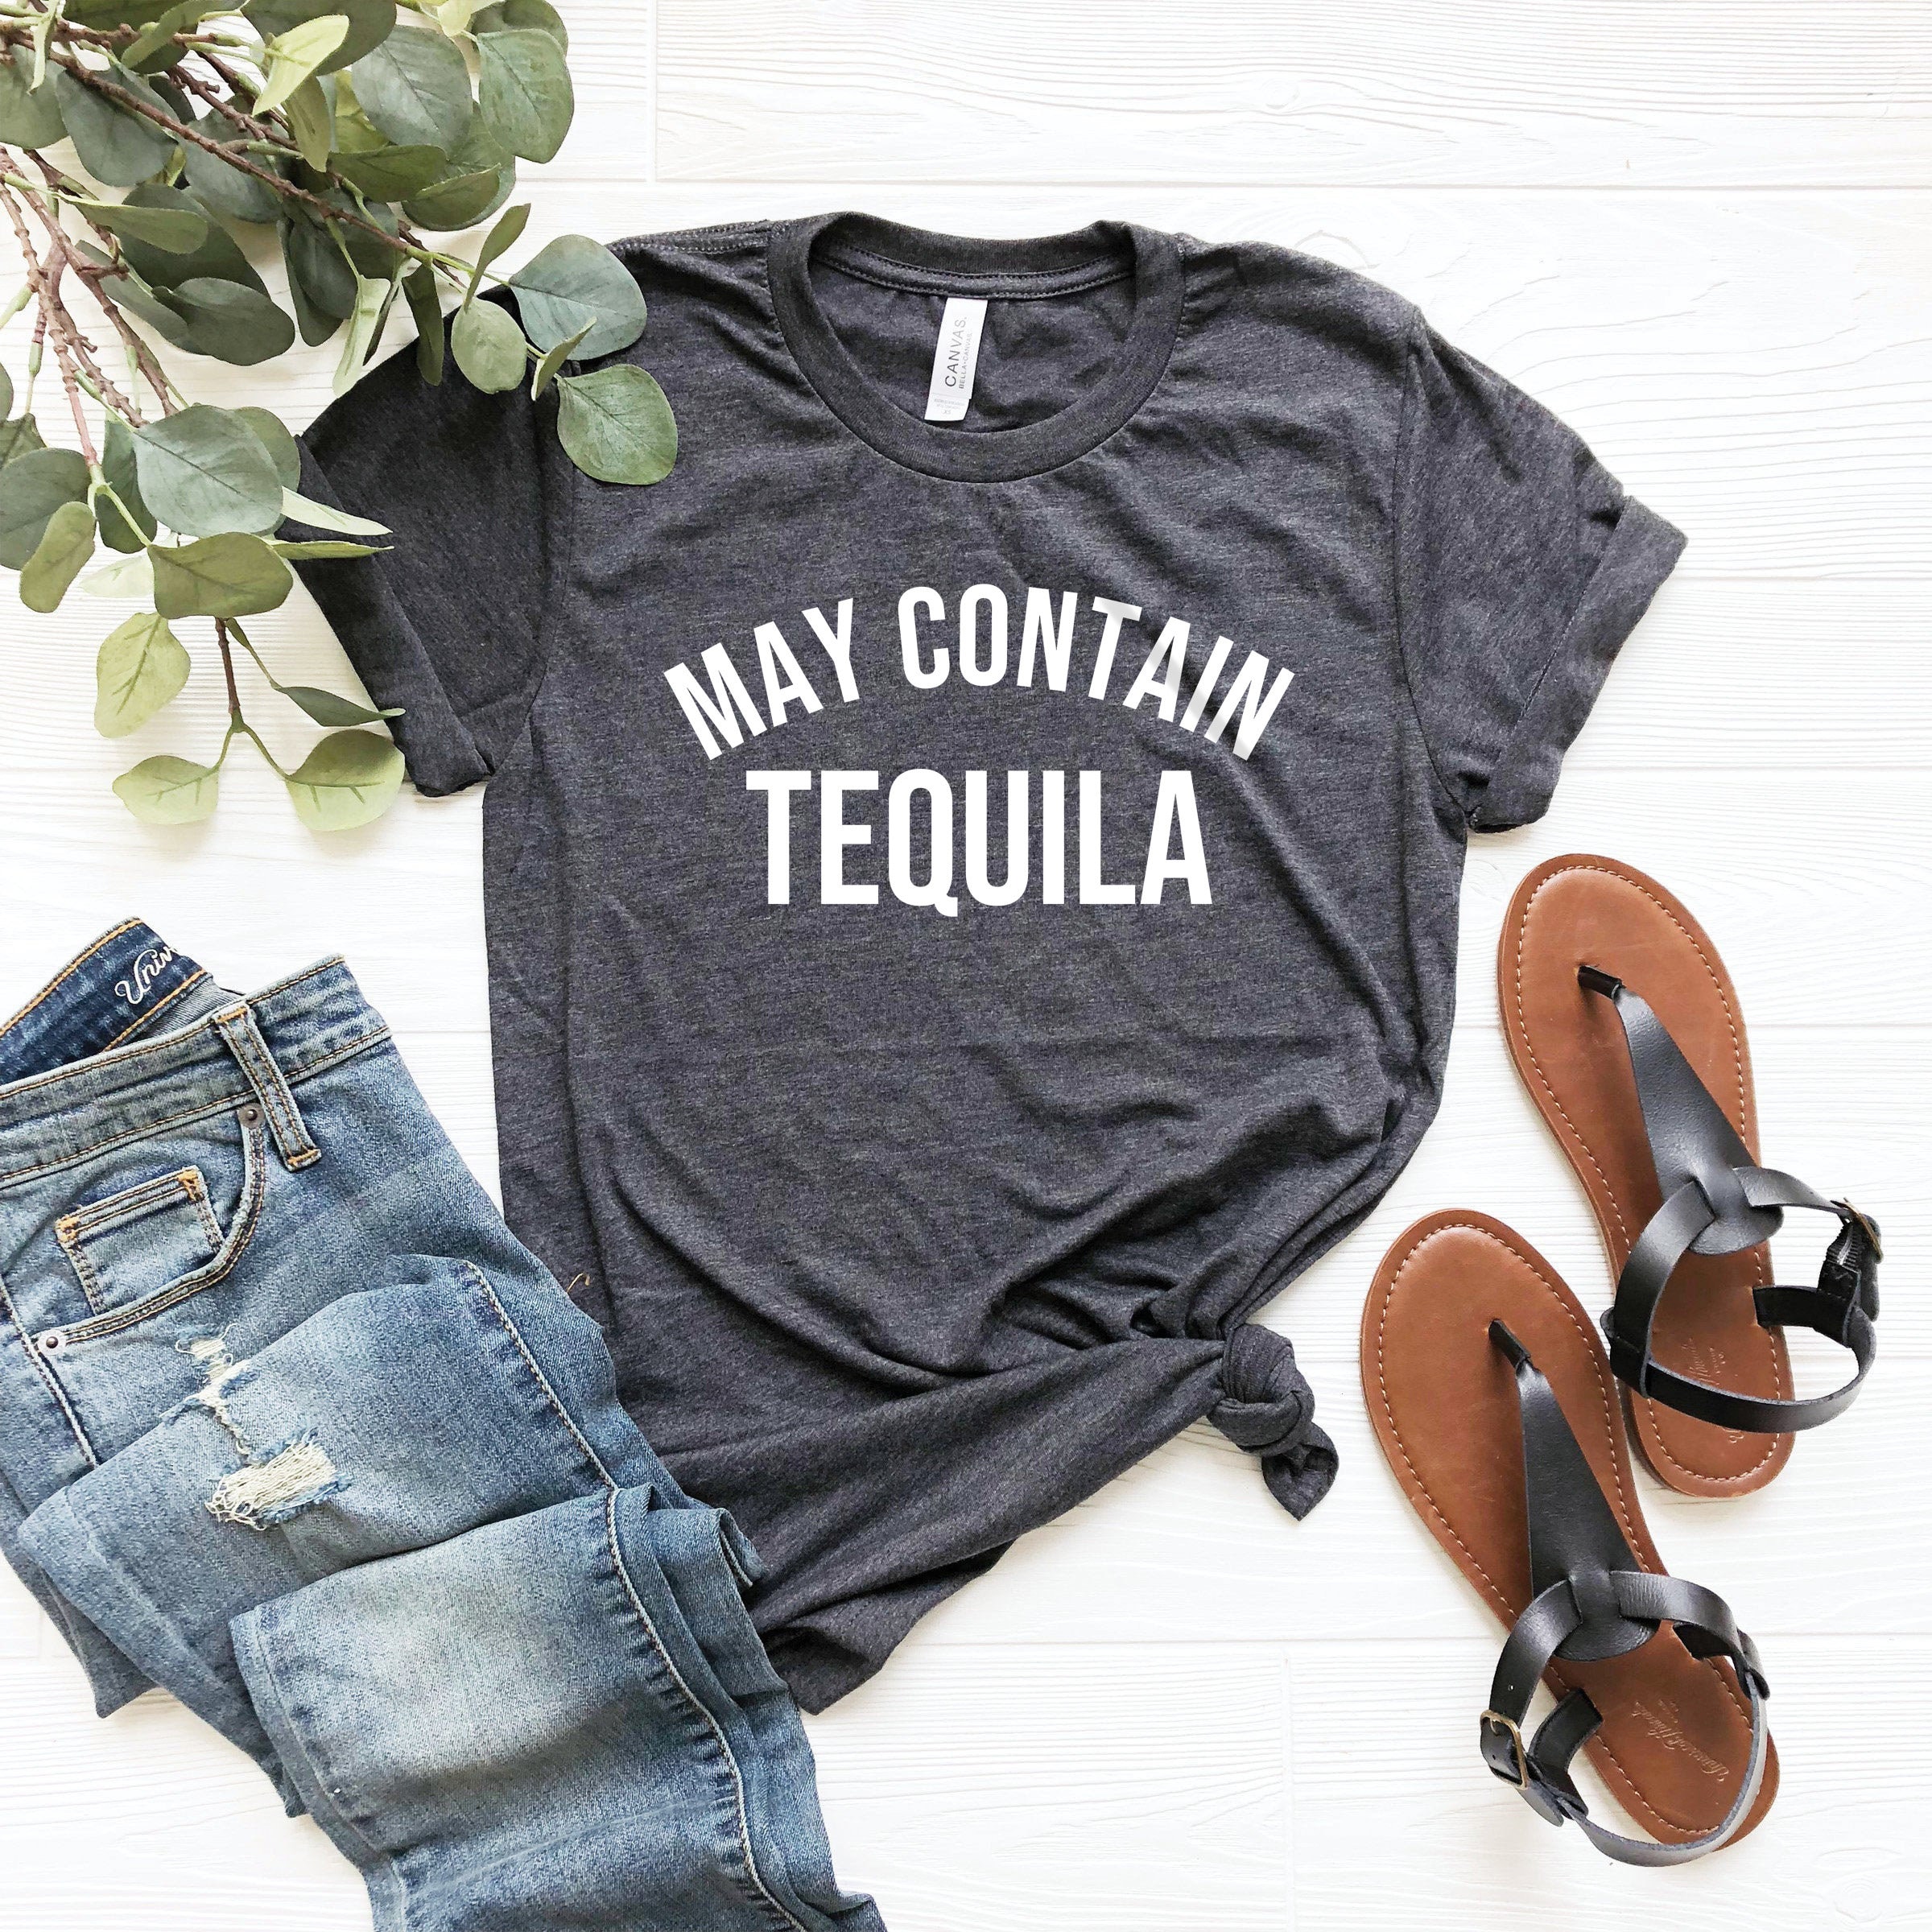 Snazzy “May Contain Tequila” Shirt